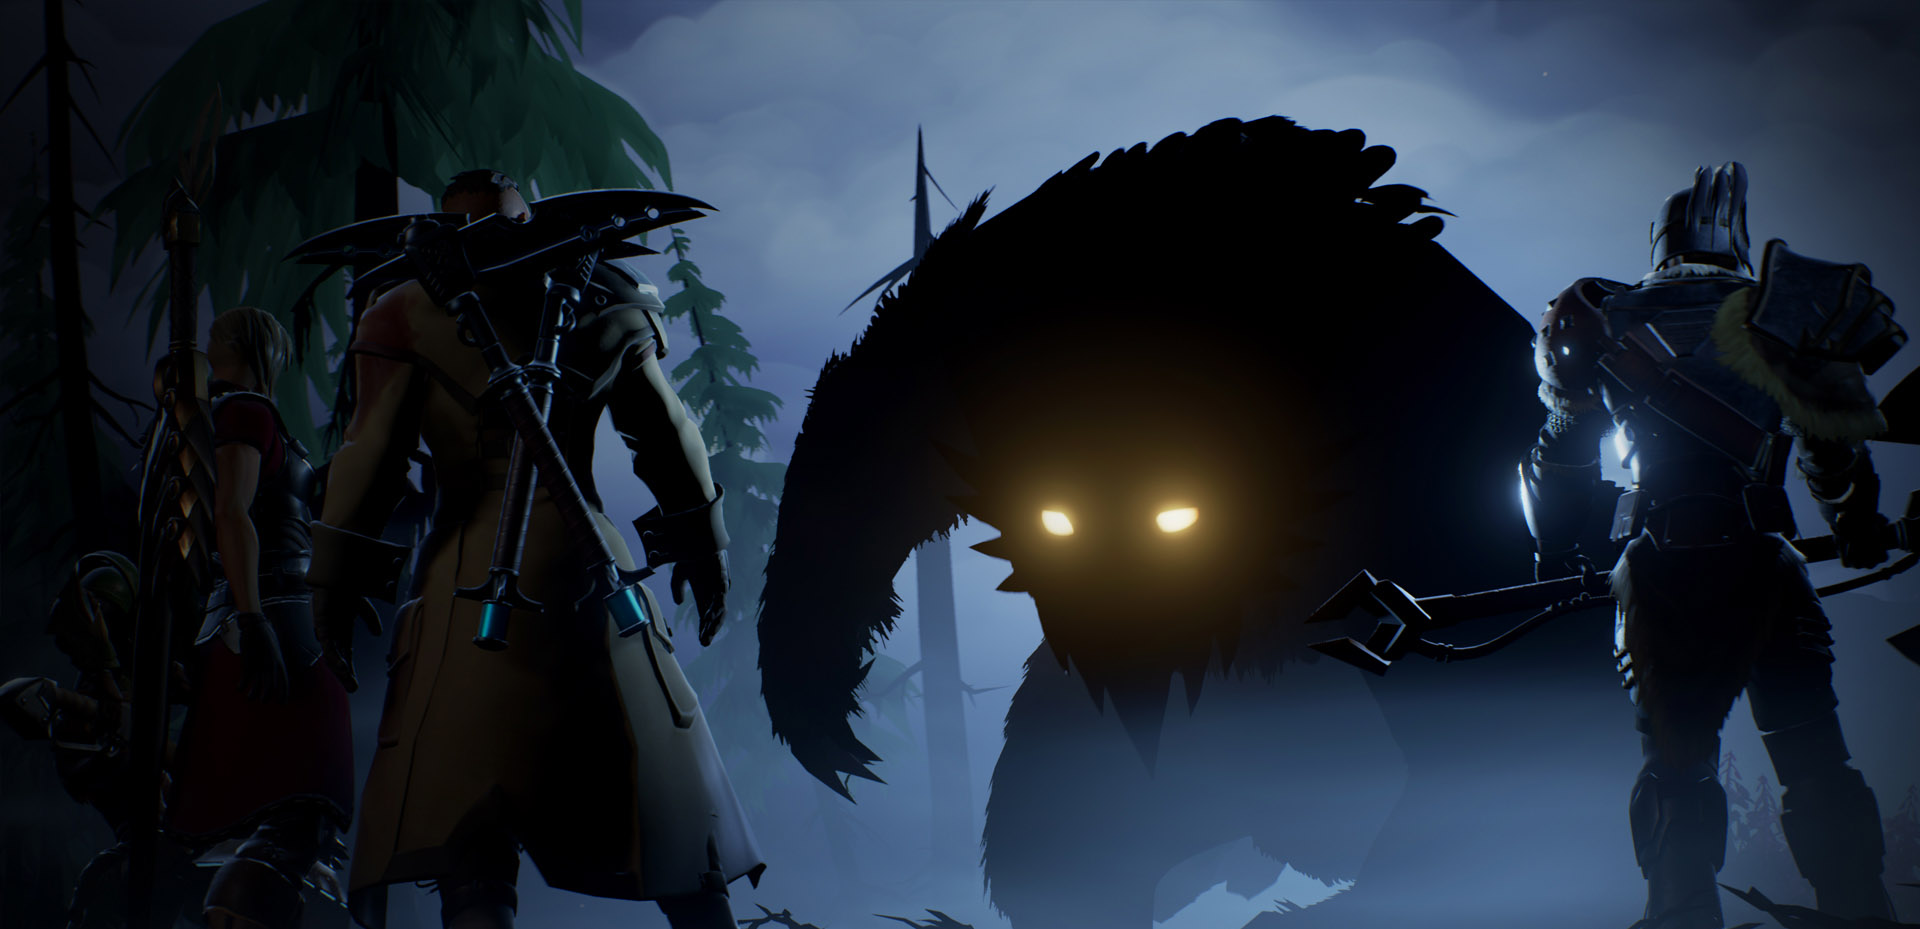 In this screenshot from Dauntless, four heroes stand facing a large creature hidden in shadows. The creatures eyes glow yellow as it crouches down, prepared to attack. The heroes carry a variety of weapons on their backs. Trees and night fog can be seen i